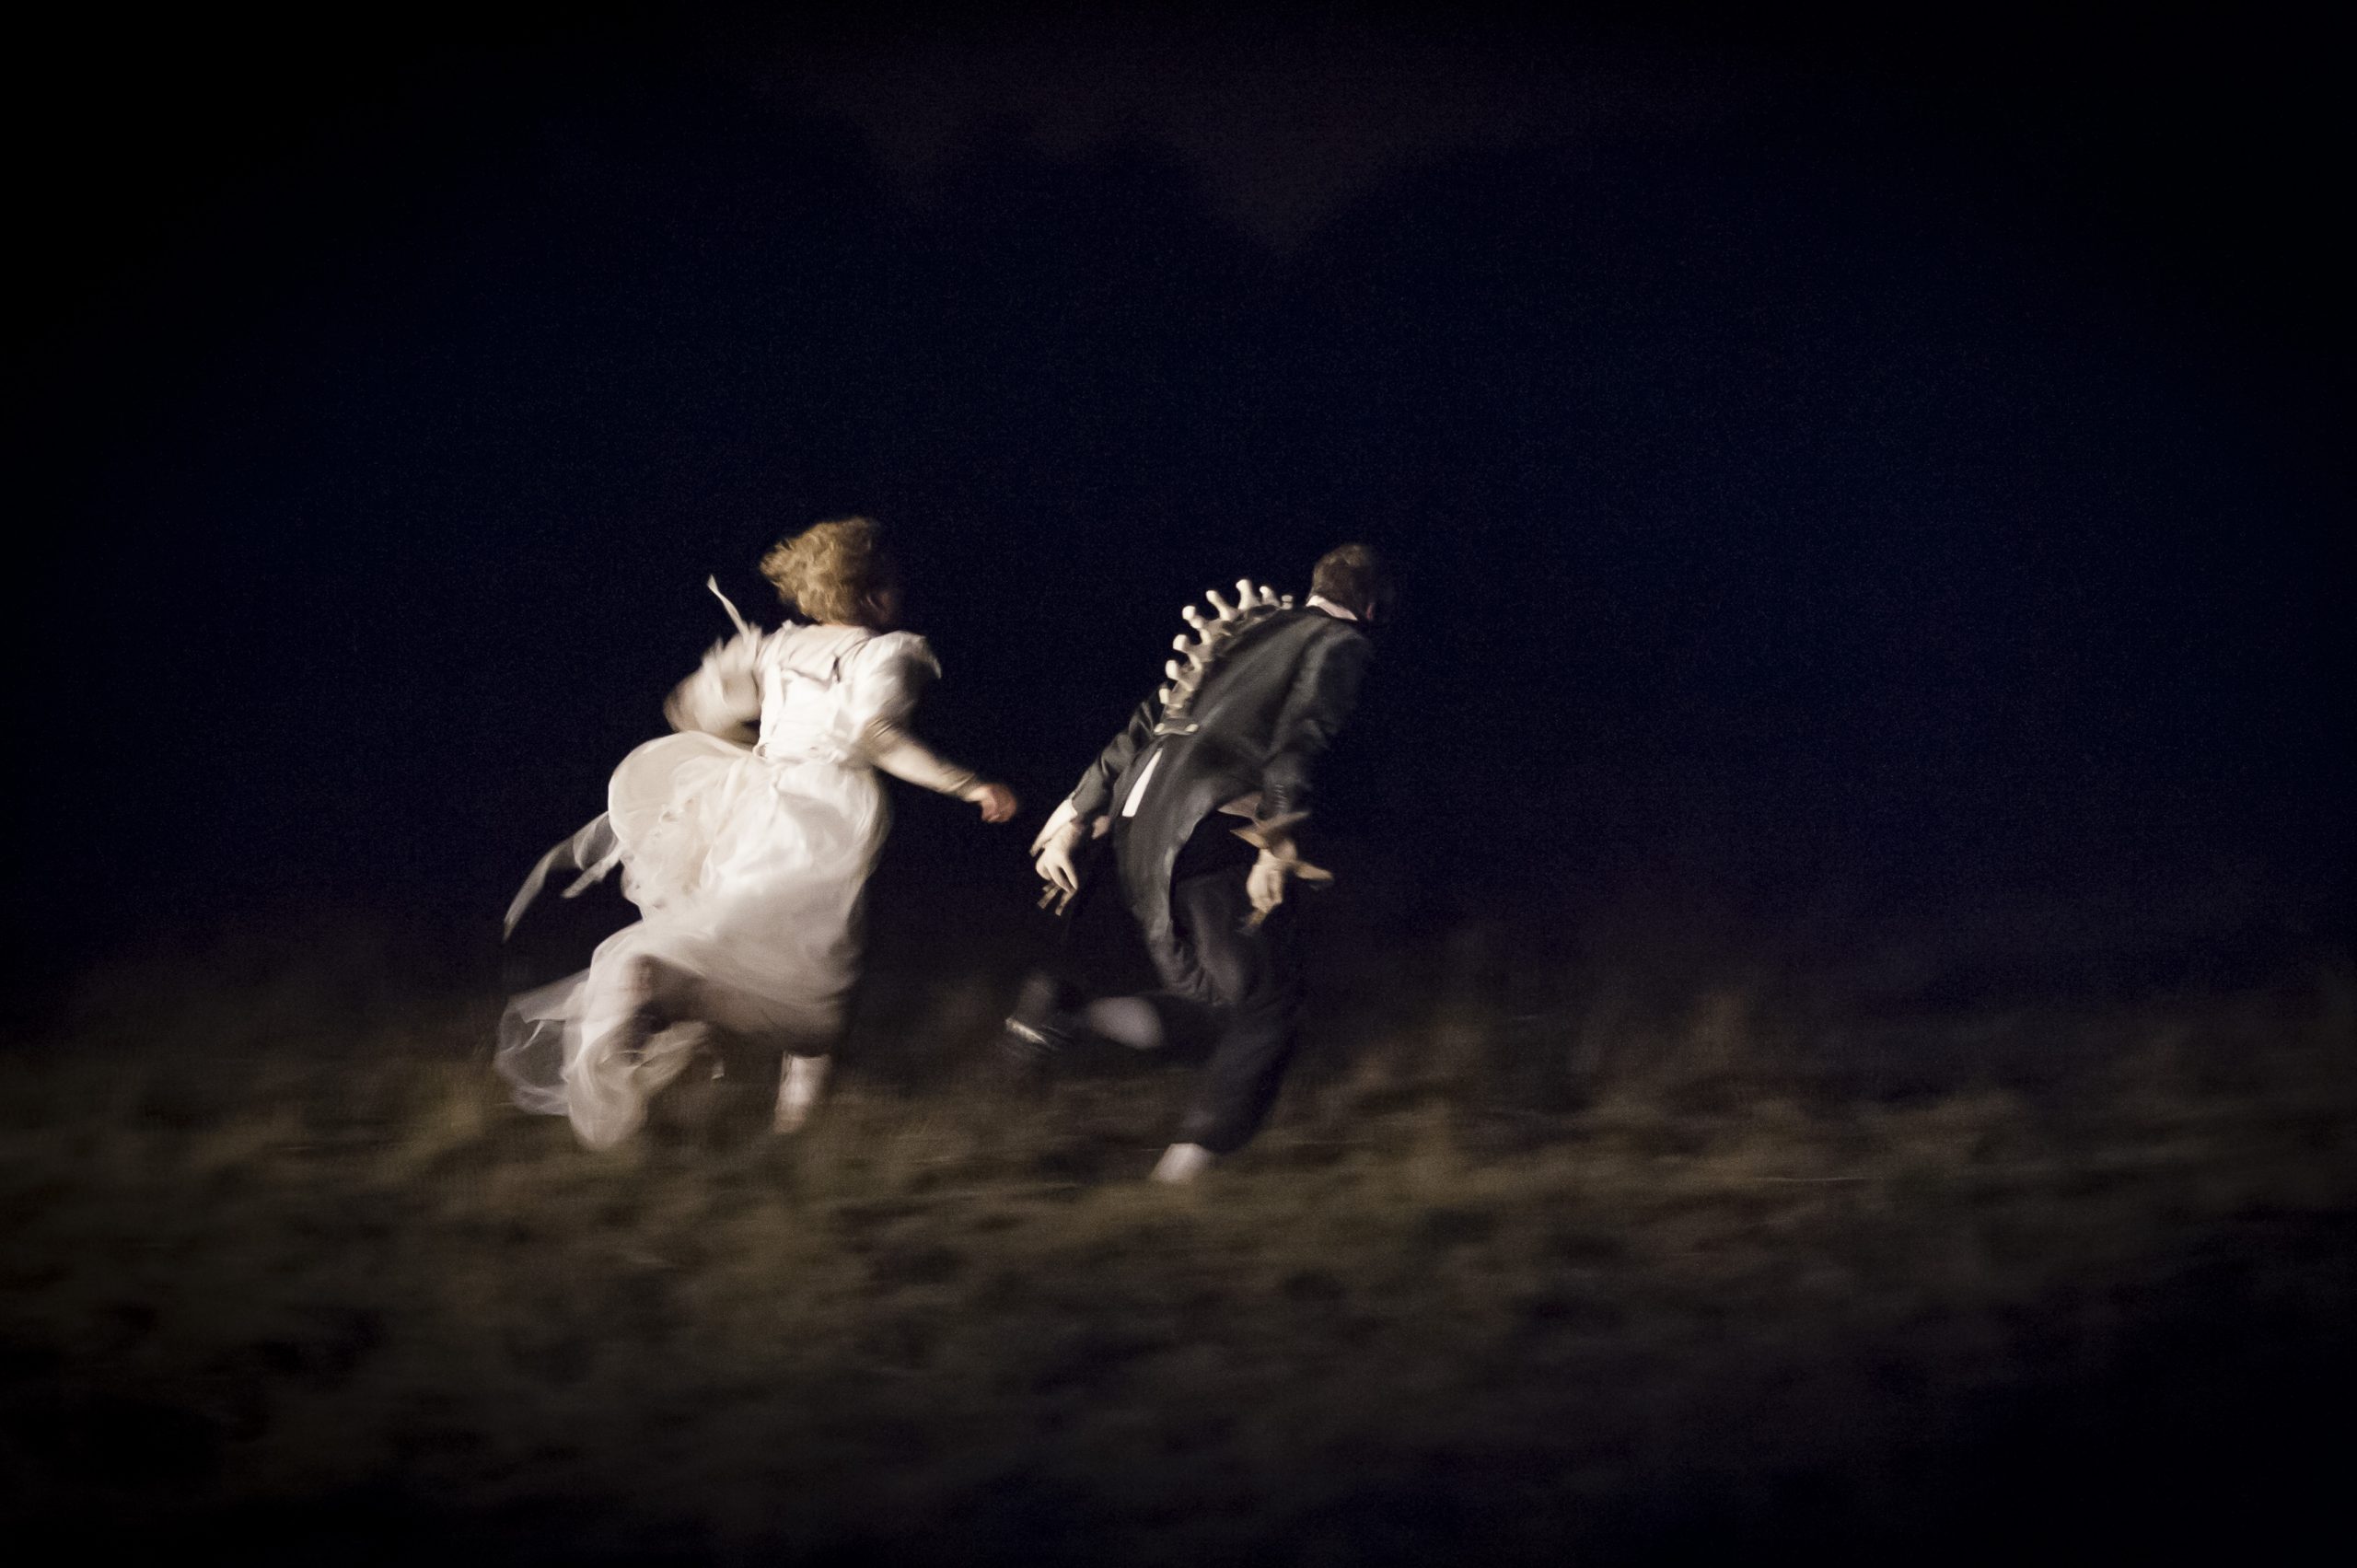 The Wolf Girl Alice, wearing a wedding dress, and The Duke in a tailcoat, an exposed animalistic spine protruding from it, run off into the darkness.